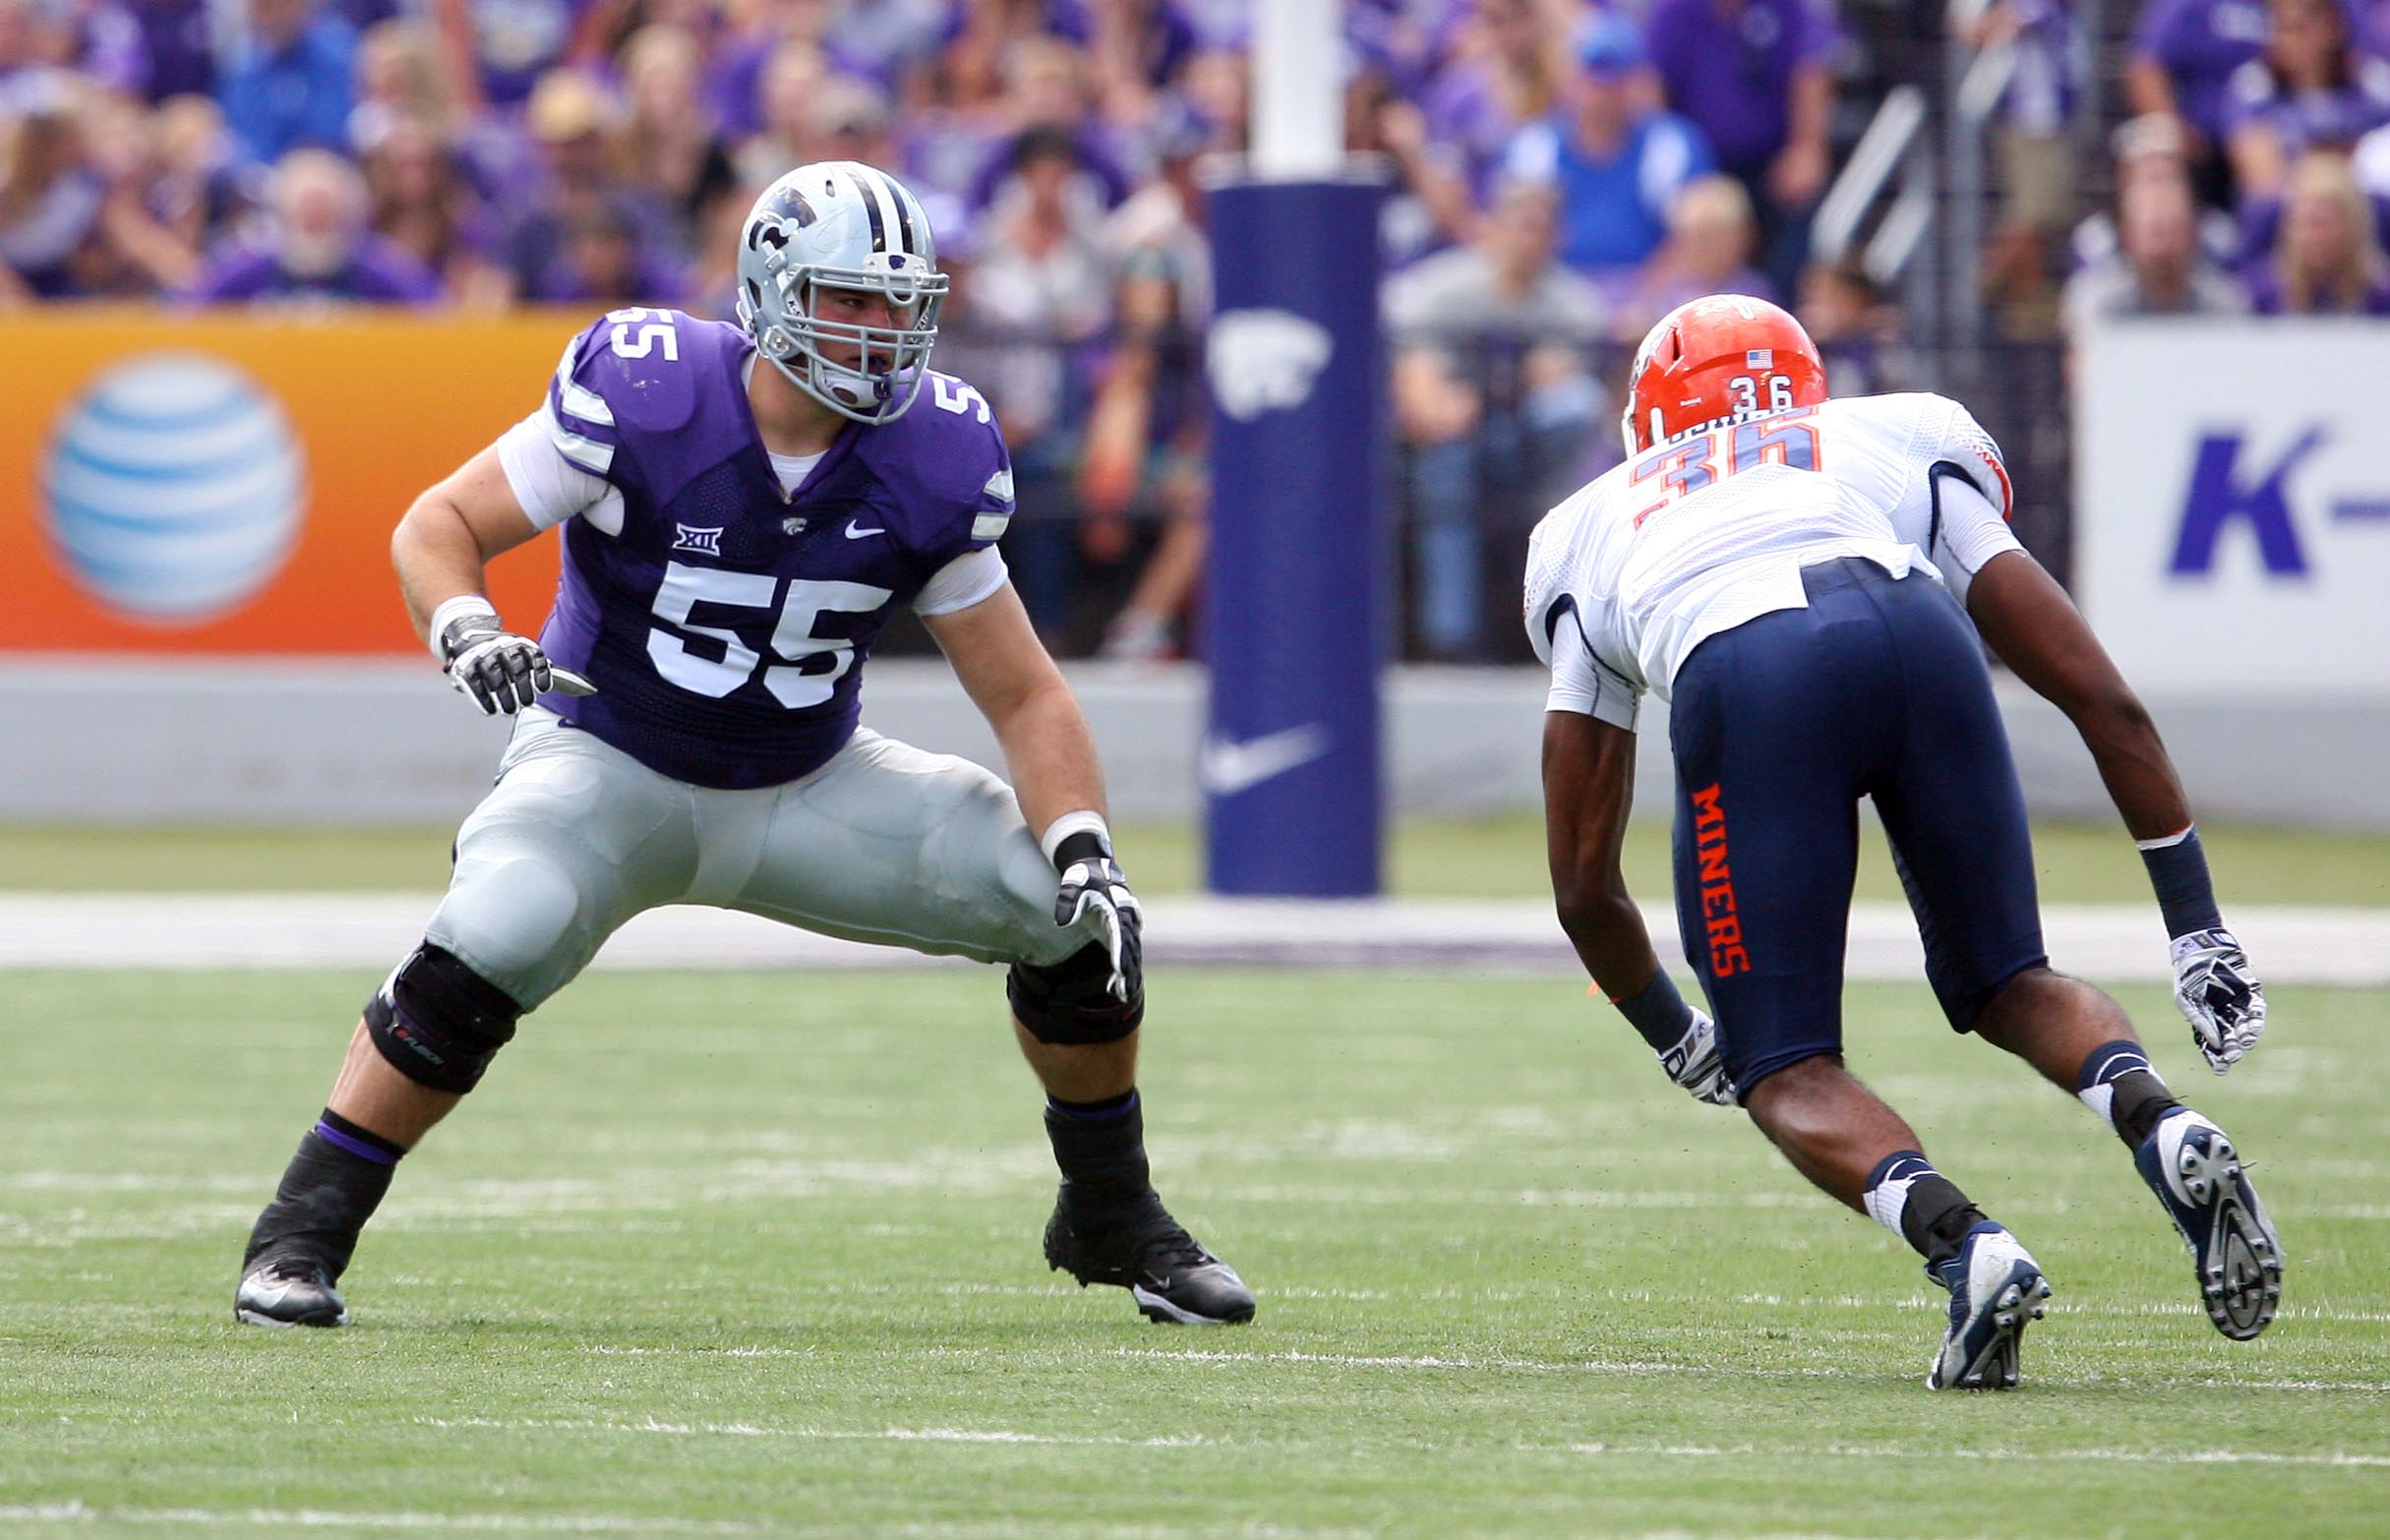 Cody Whitehair is leaving huge shoes to fill at left tackle. Scott Frantz should get to lace them up first.